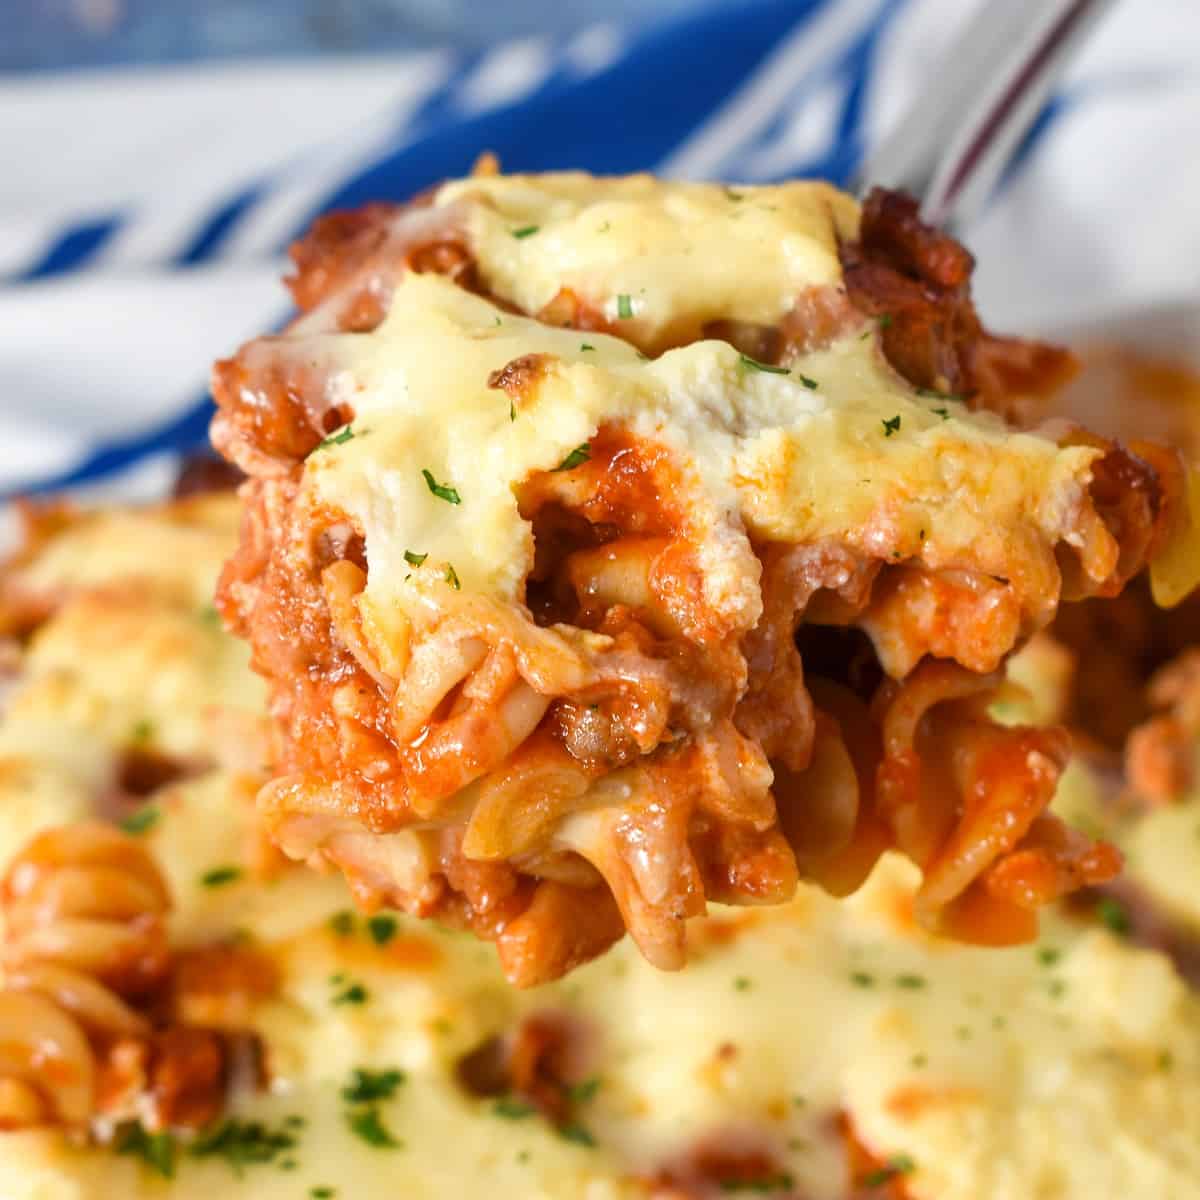 A close up image of a serving of the lasagna casserole.